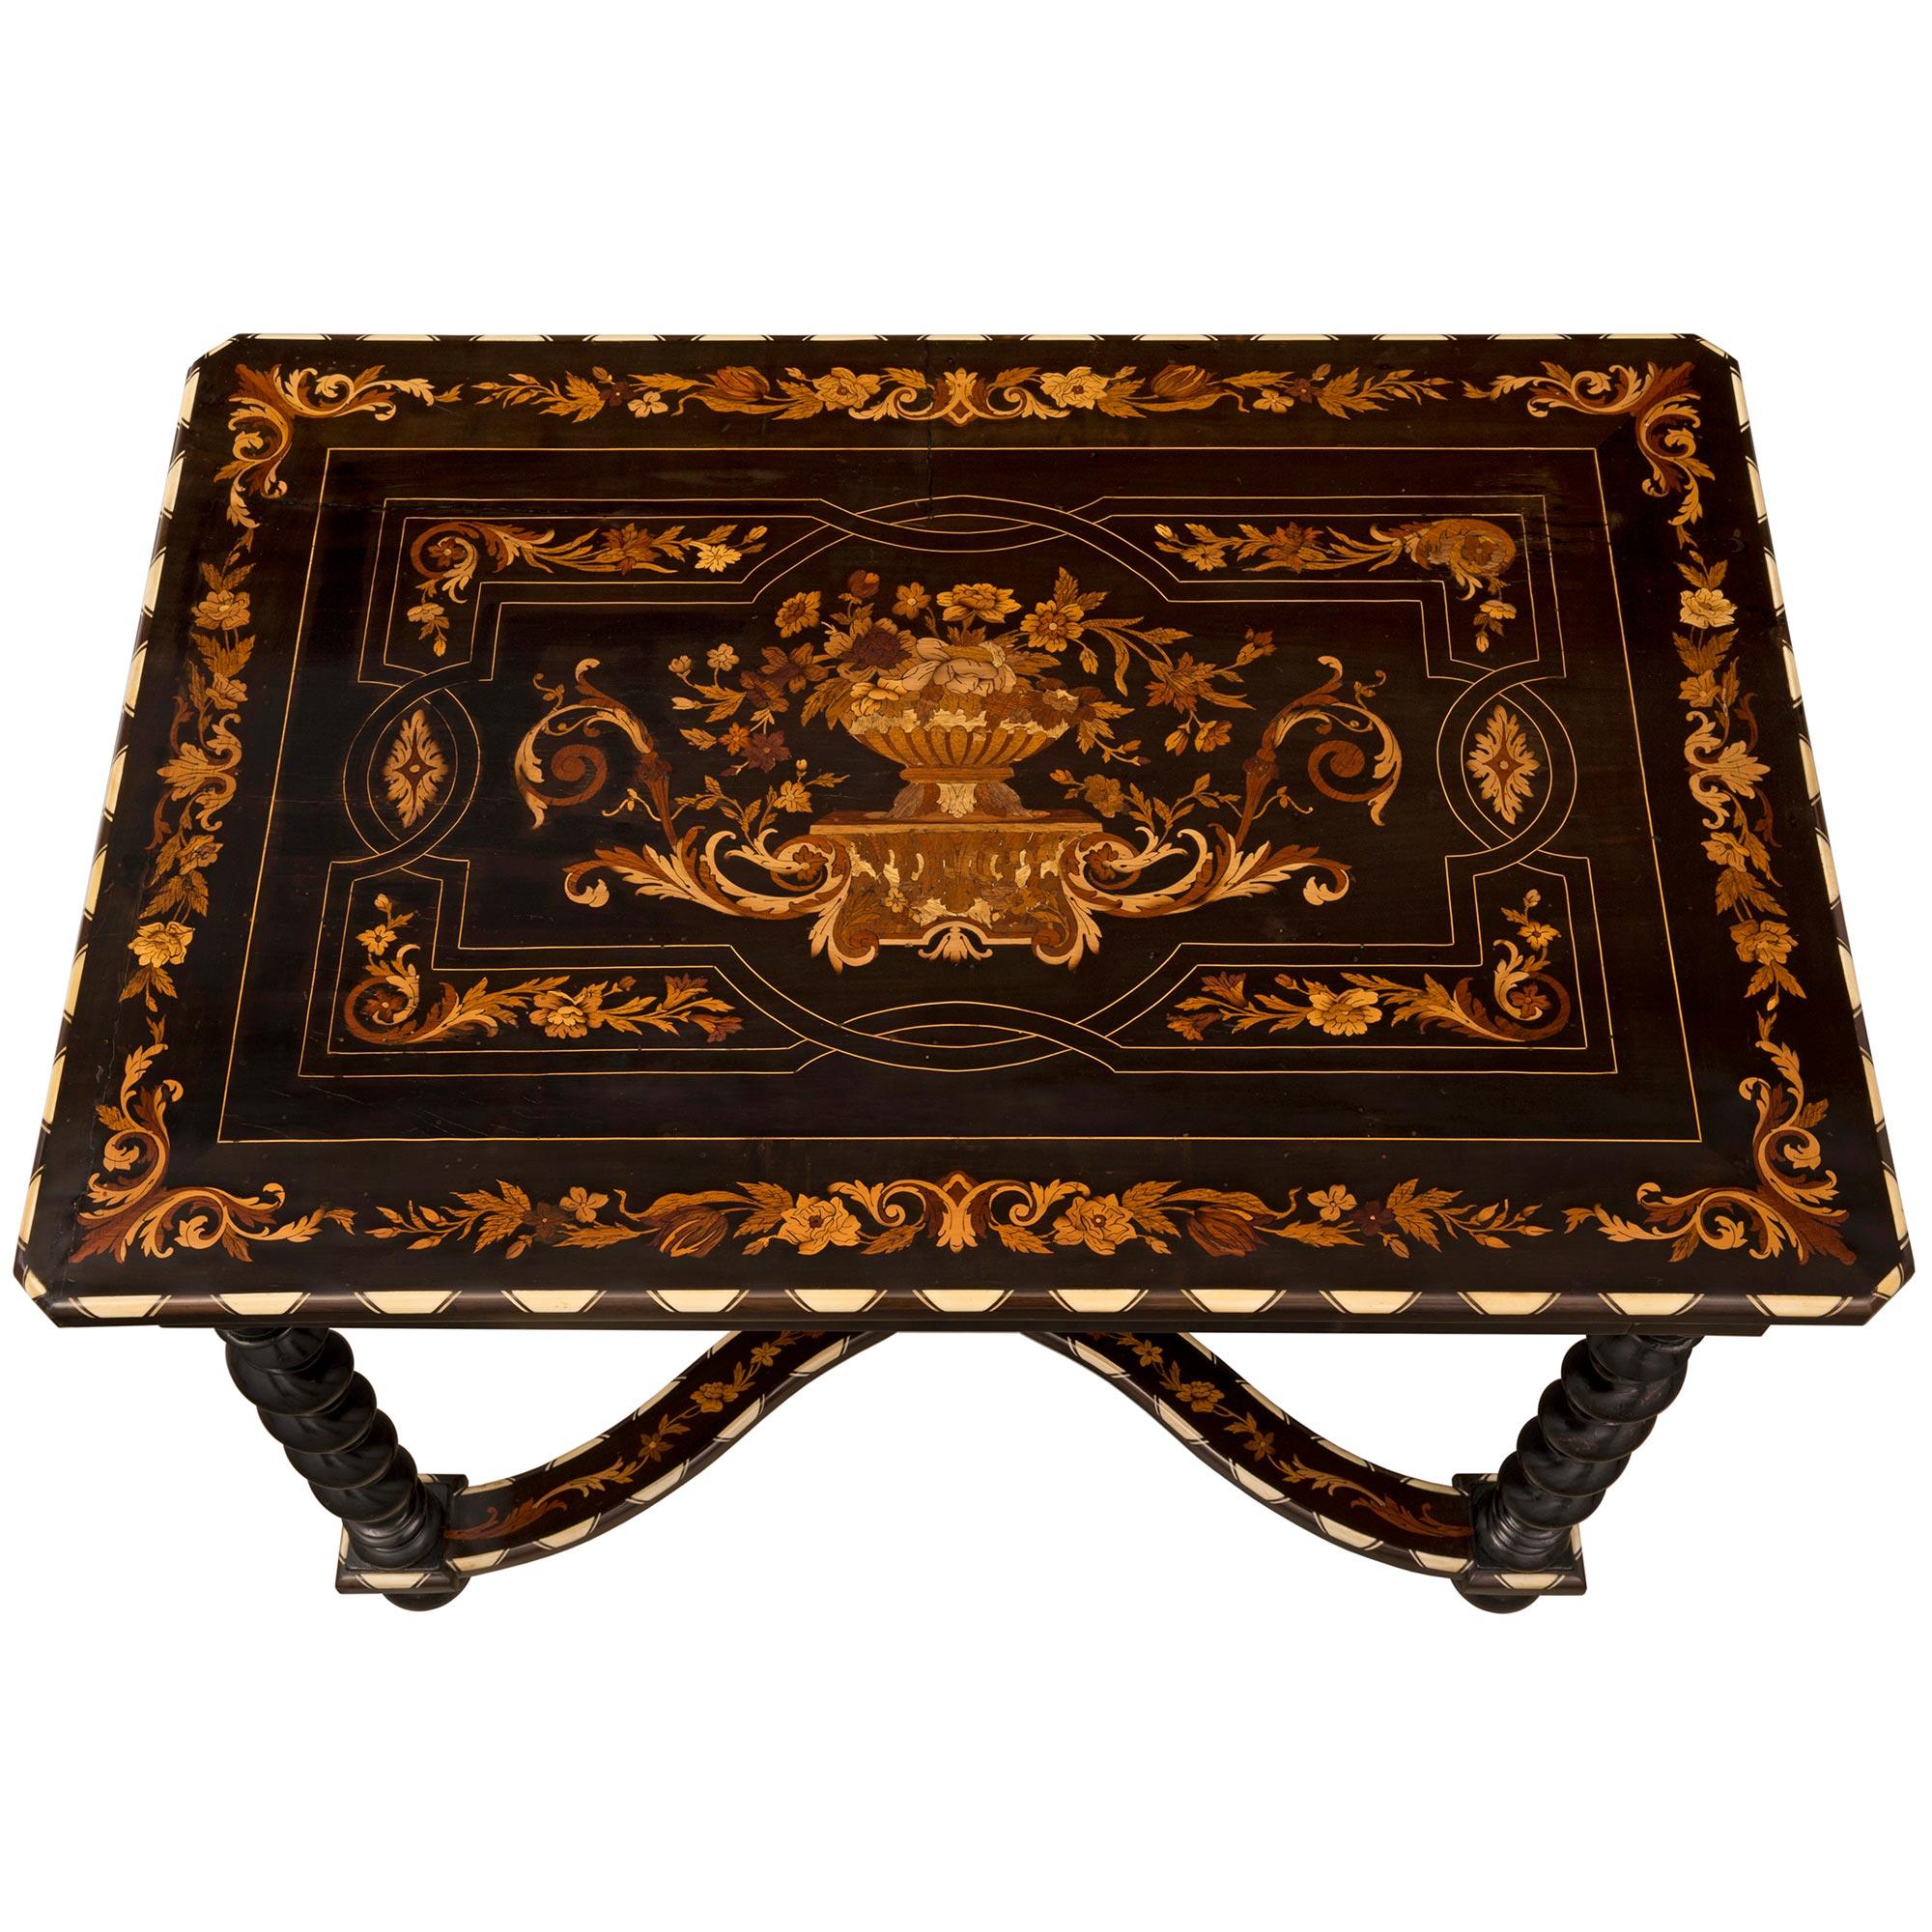 A stunning Italian 19th century ebony, bone and exotic wood center table / desk. The table is raised by fine bun feet below unique and most decorative carved spiral legs. Each leg is connected by an elegant scalloped 'X' shaped stretcher with